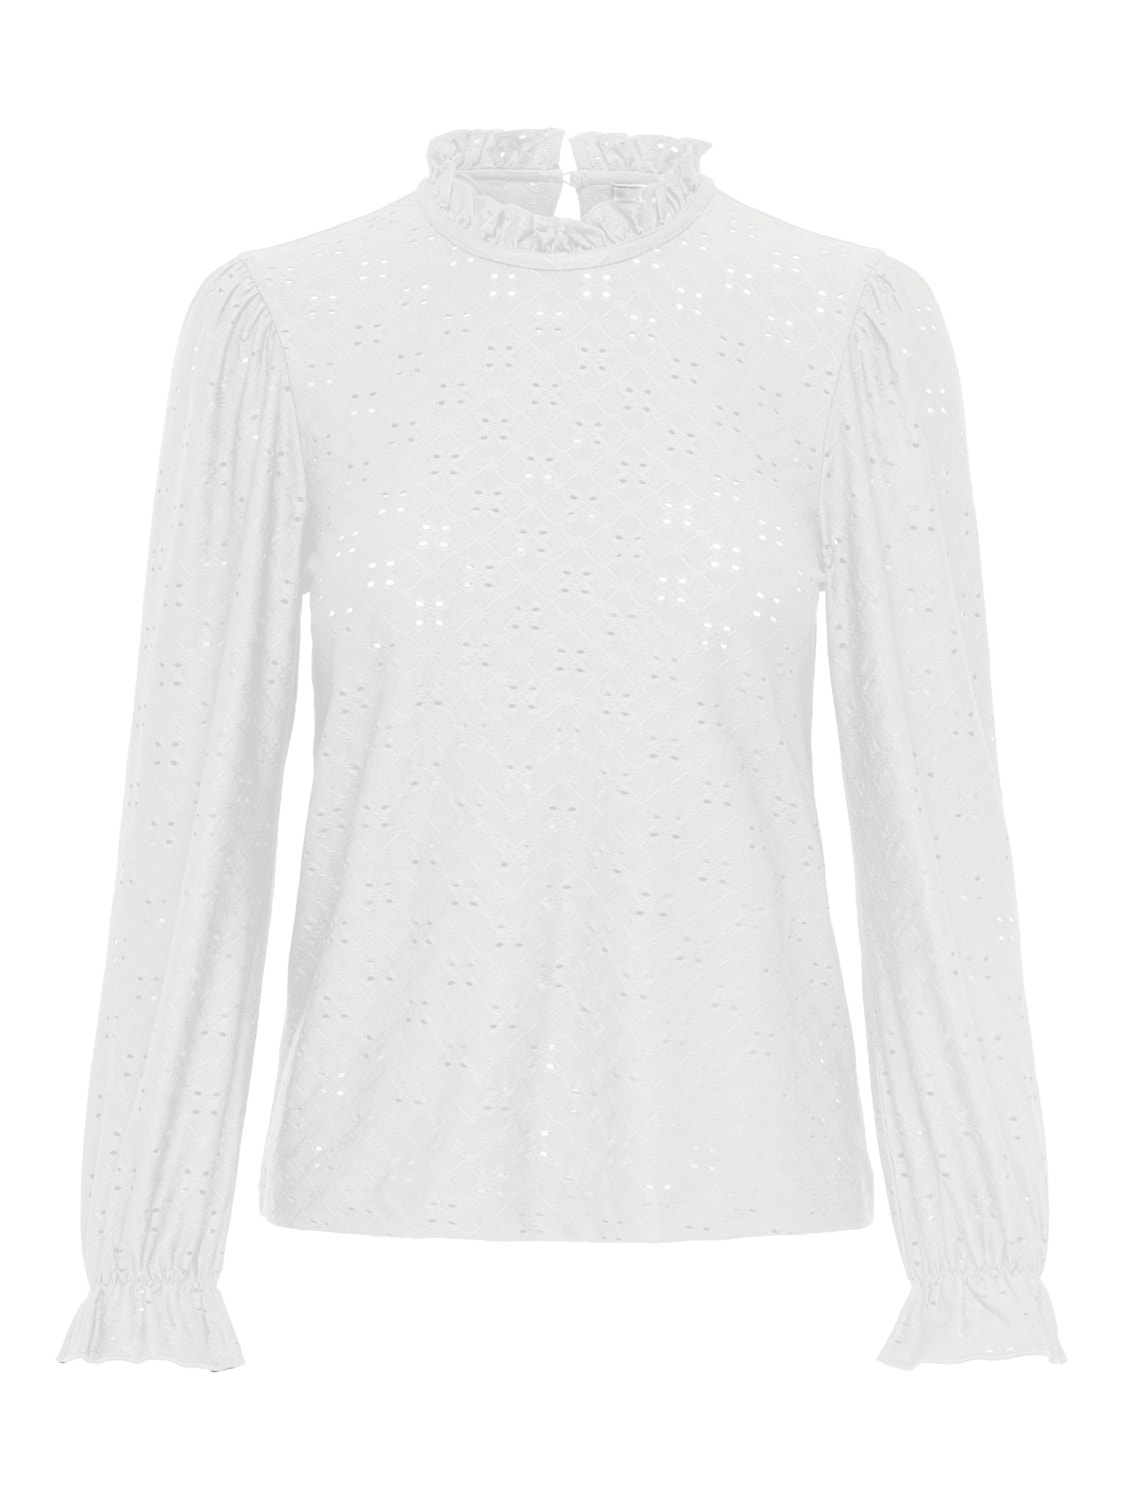 ONLY high neck top with long sleeves -Cloud Dancer - 15300629